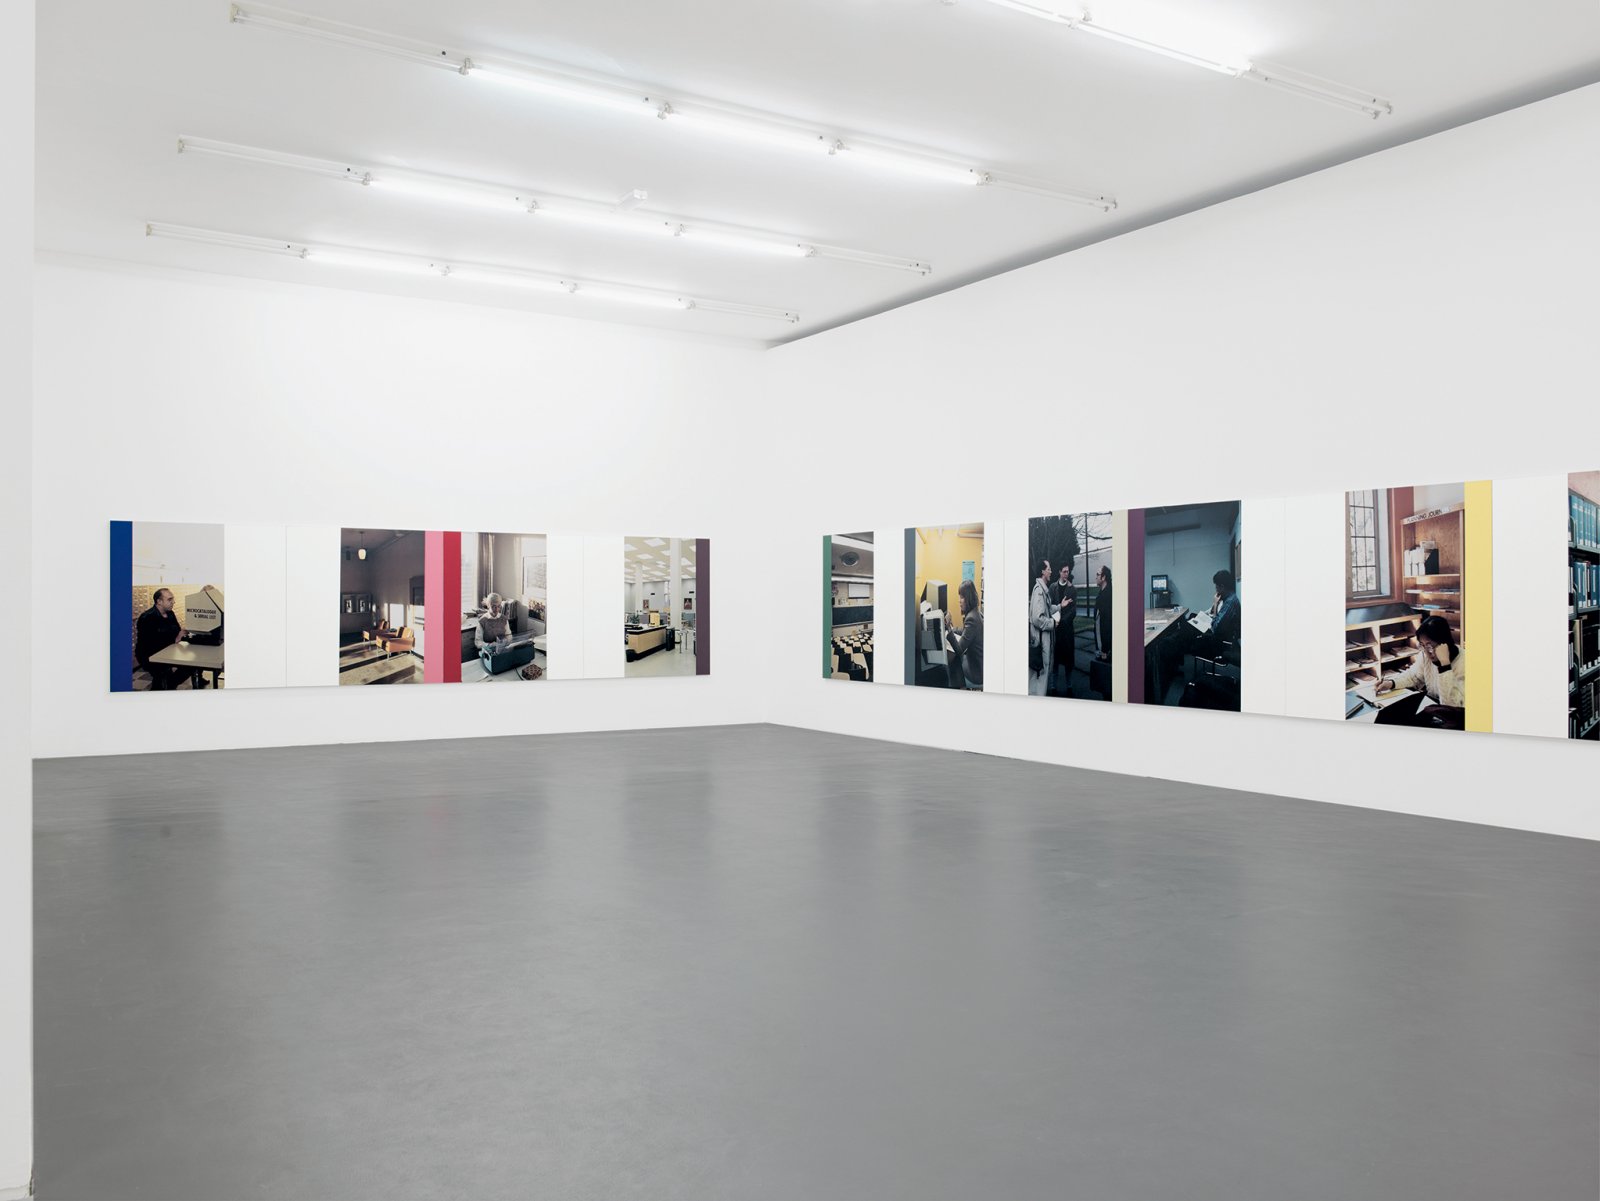 ​Ian Wallace, ​The Idea of the University I–XVI​, 1990, photolaminate with acrylic on canvas, each 60 x 60 in. (152 x 152 cm). Installation view, ​A Literature of Images​, Witte de With, Rotterdam, 2008 by Ian Wallace